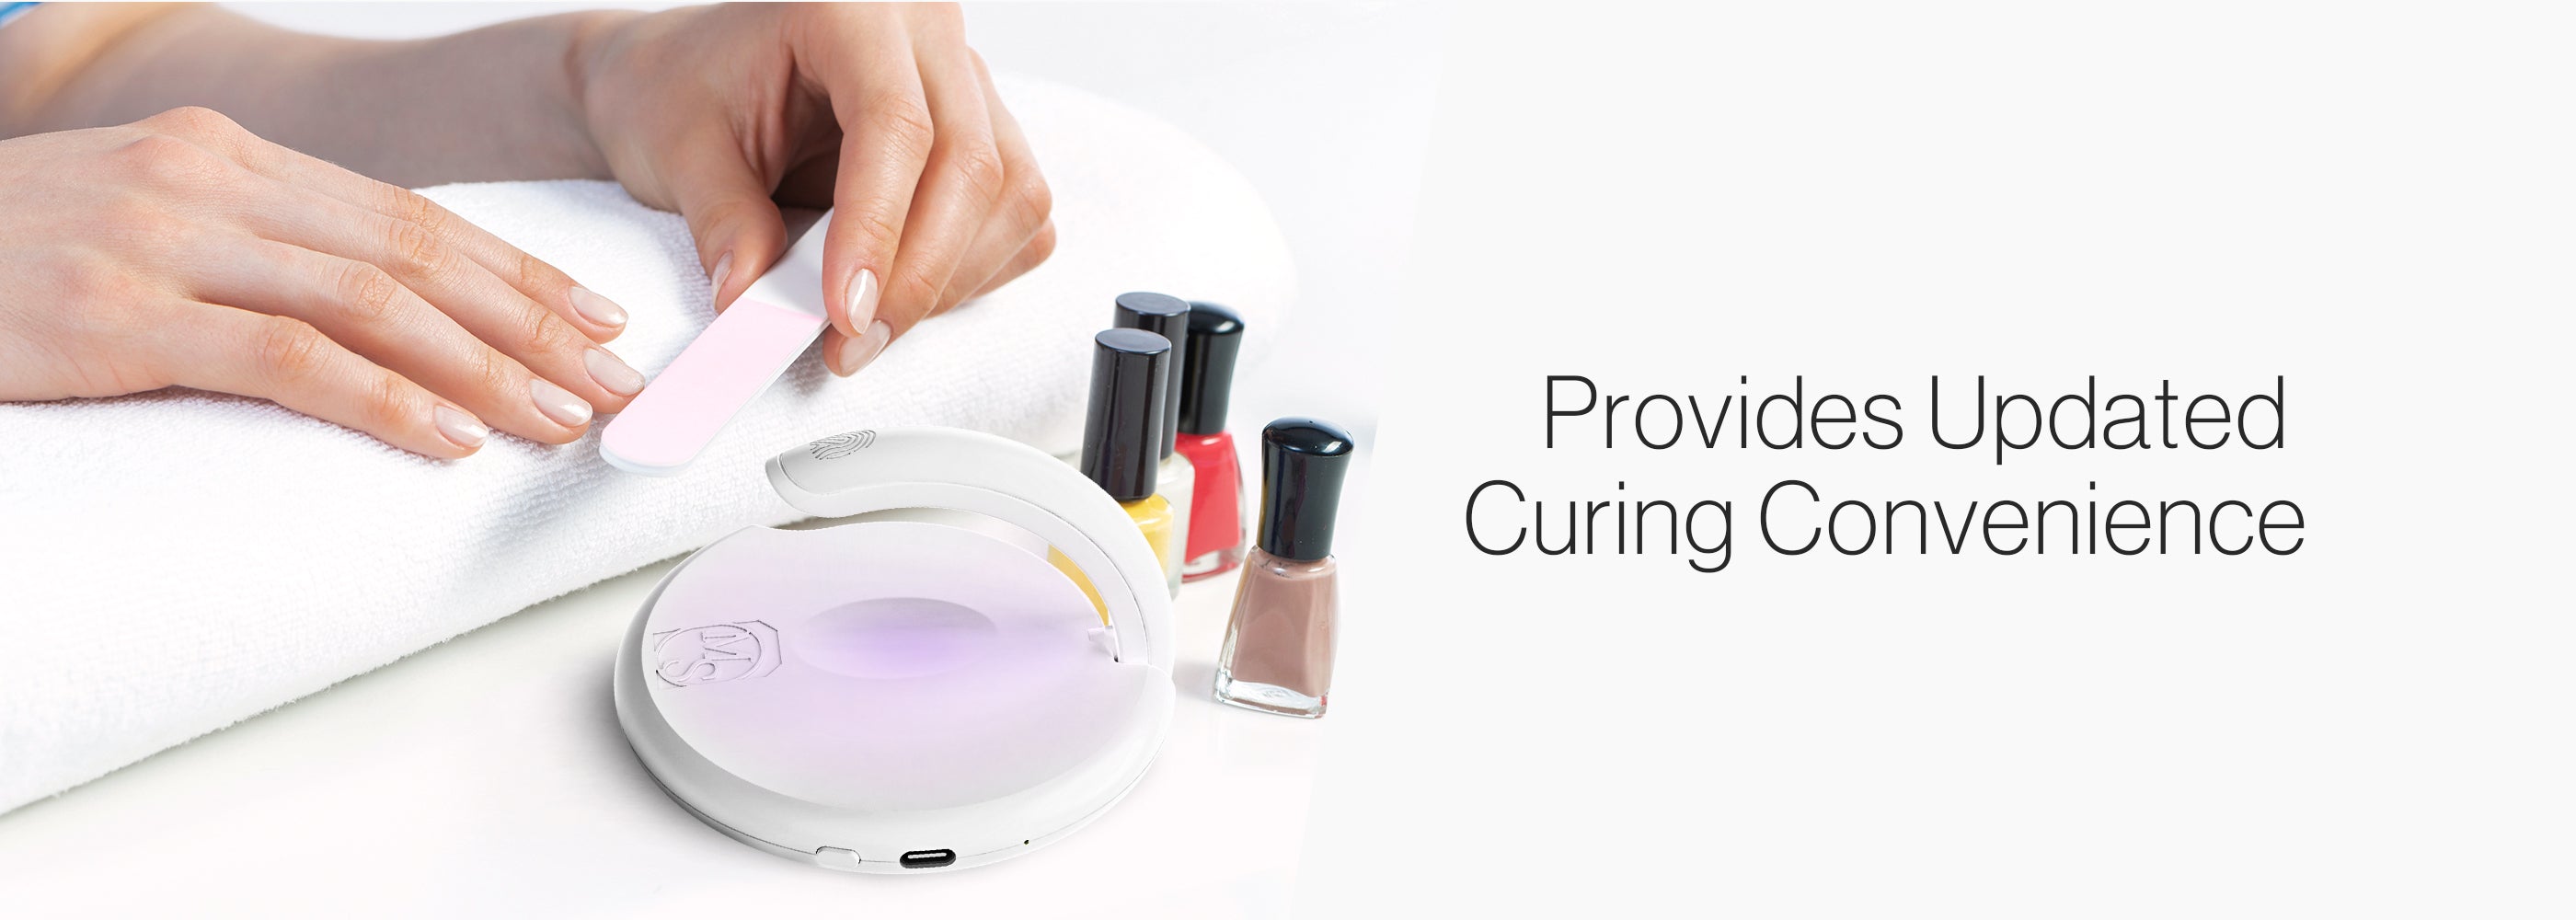 use Rechargeable Mini 2 in 1 LED/UV Nail Art Lamp can enjoy updated curing convenience